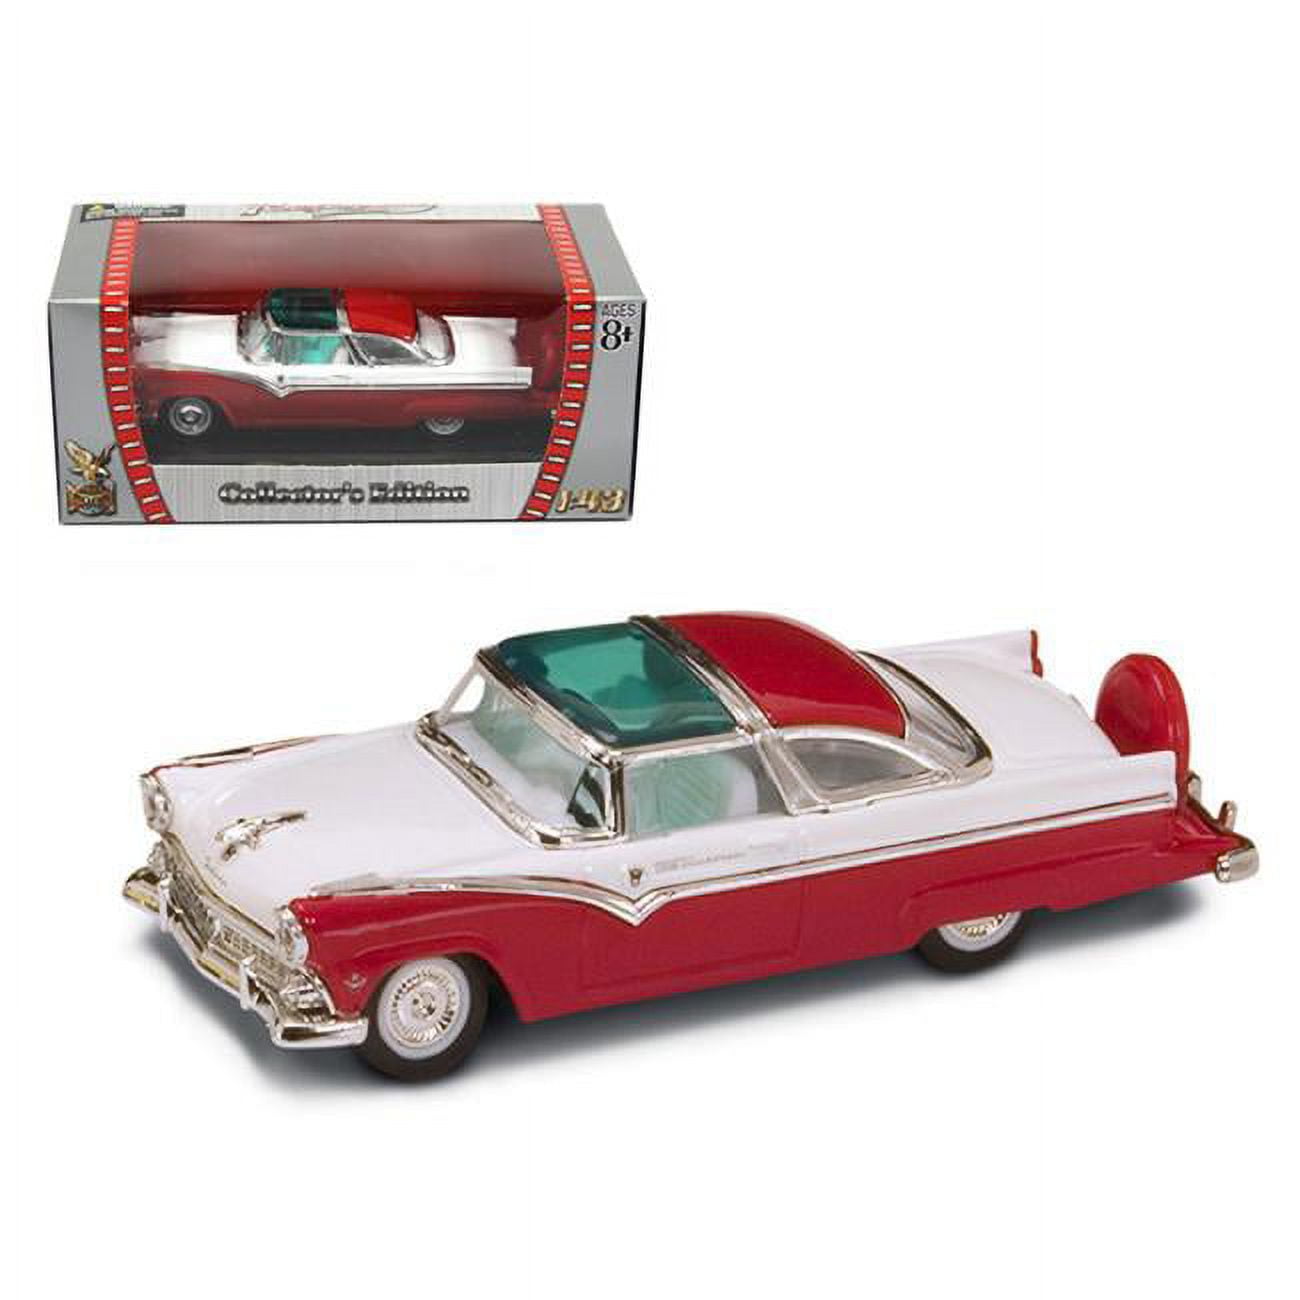 1 by 43 1955 Ford Crown Victoria Diecast Model Car, Red -  FunForever, FU994541